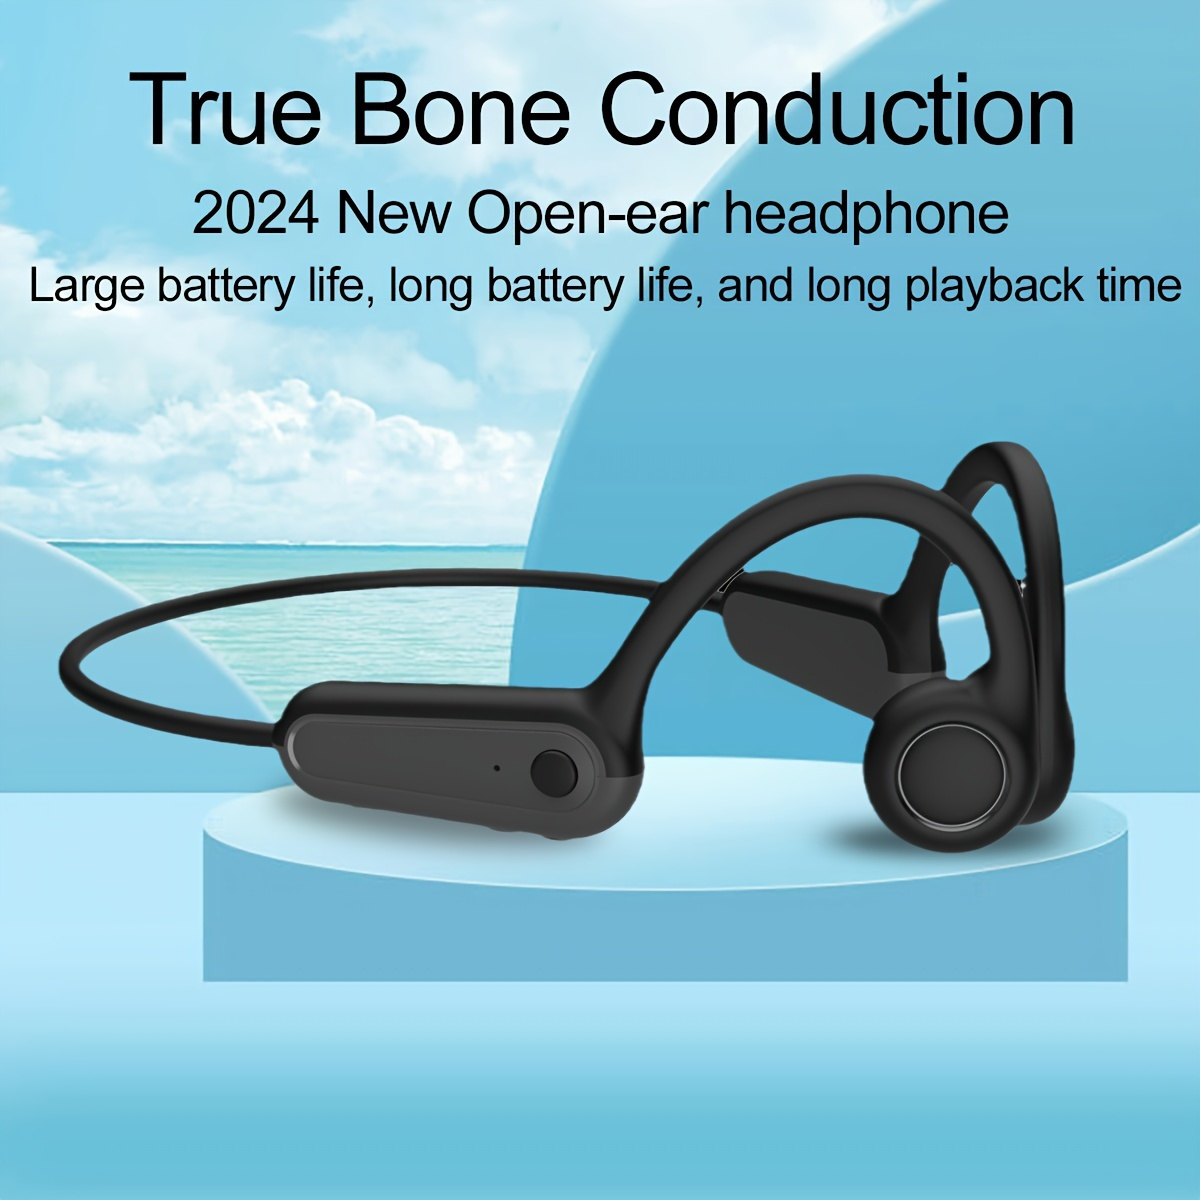 

Bone Conduction Headphones Open Ear True Wireless Sports Earphones With Built-in Mic, 2024 New Ear Hanging Type Headset For Running, Cycling, Hiking, Driving, 11 Hours Playtime